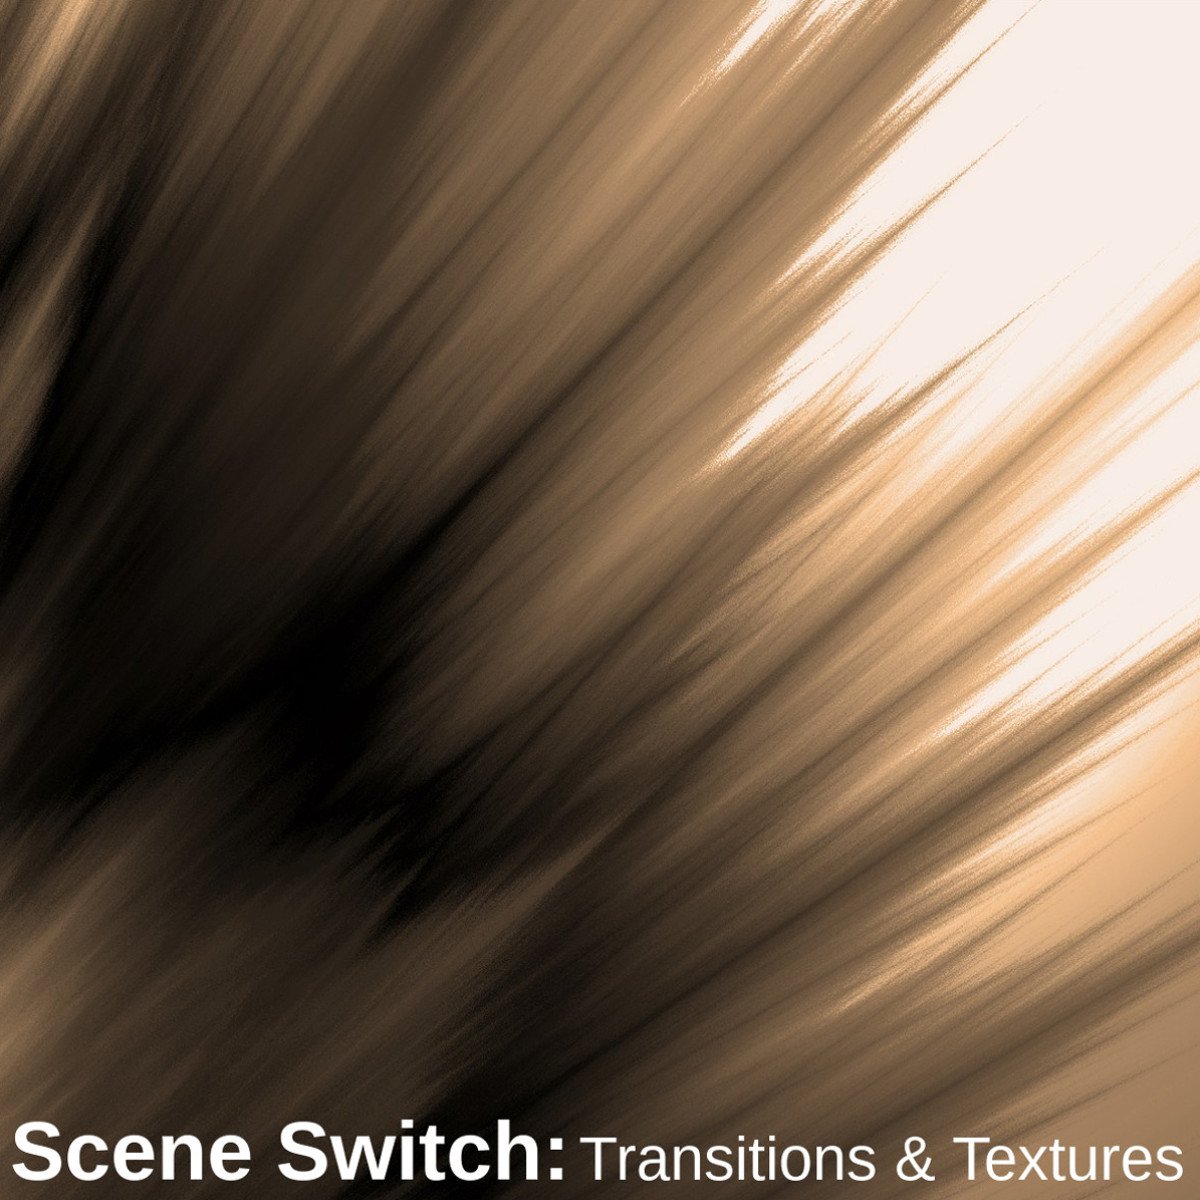 Scene Switch: Transitions & Textures